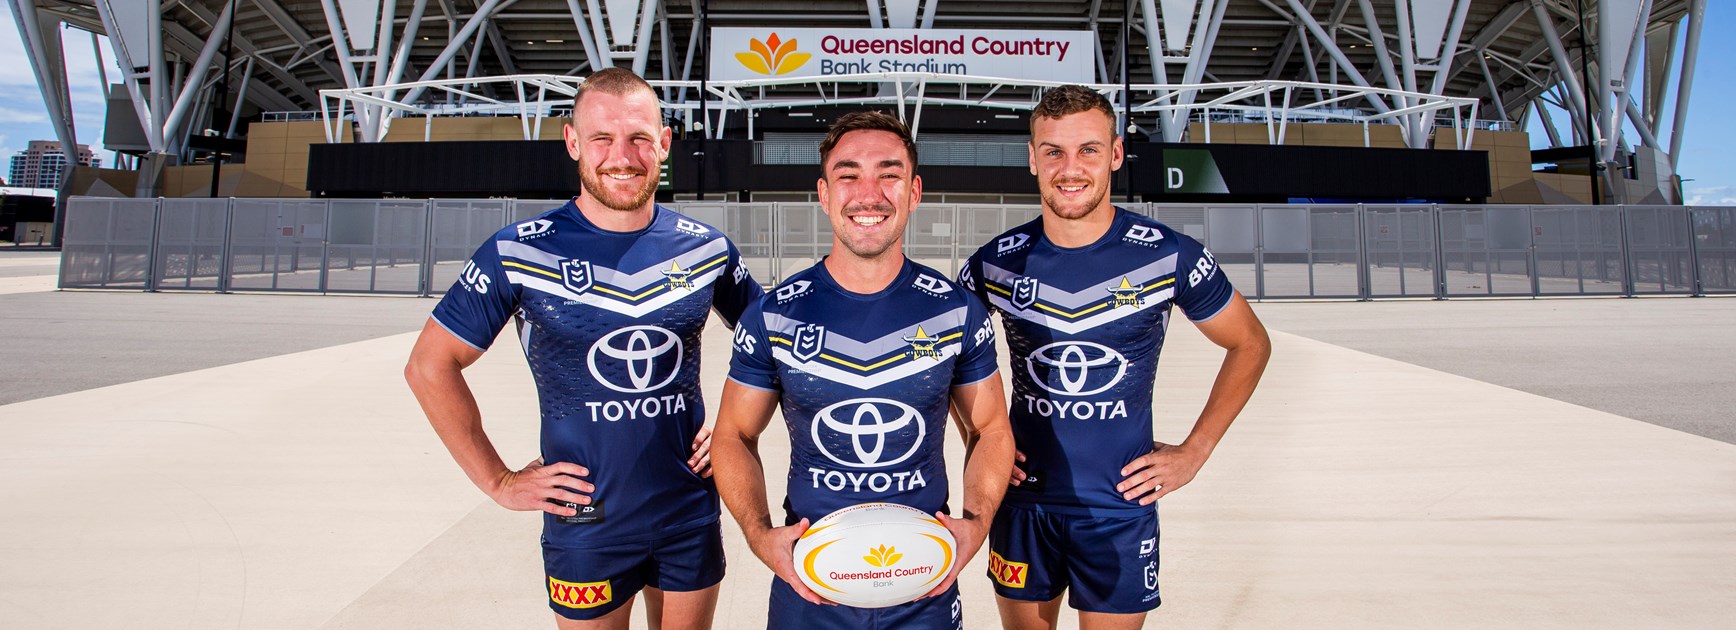 Queensland Country Bank investment in Cowboys 20-years’ strong